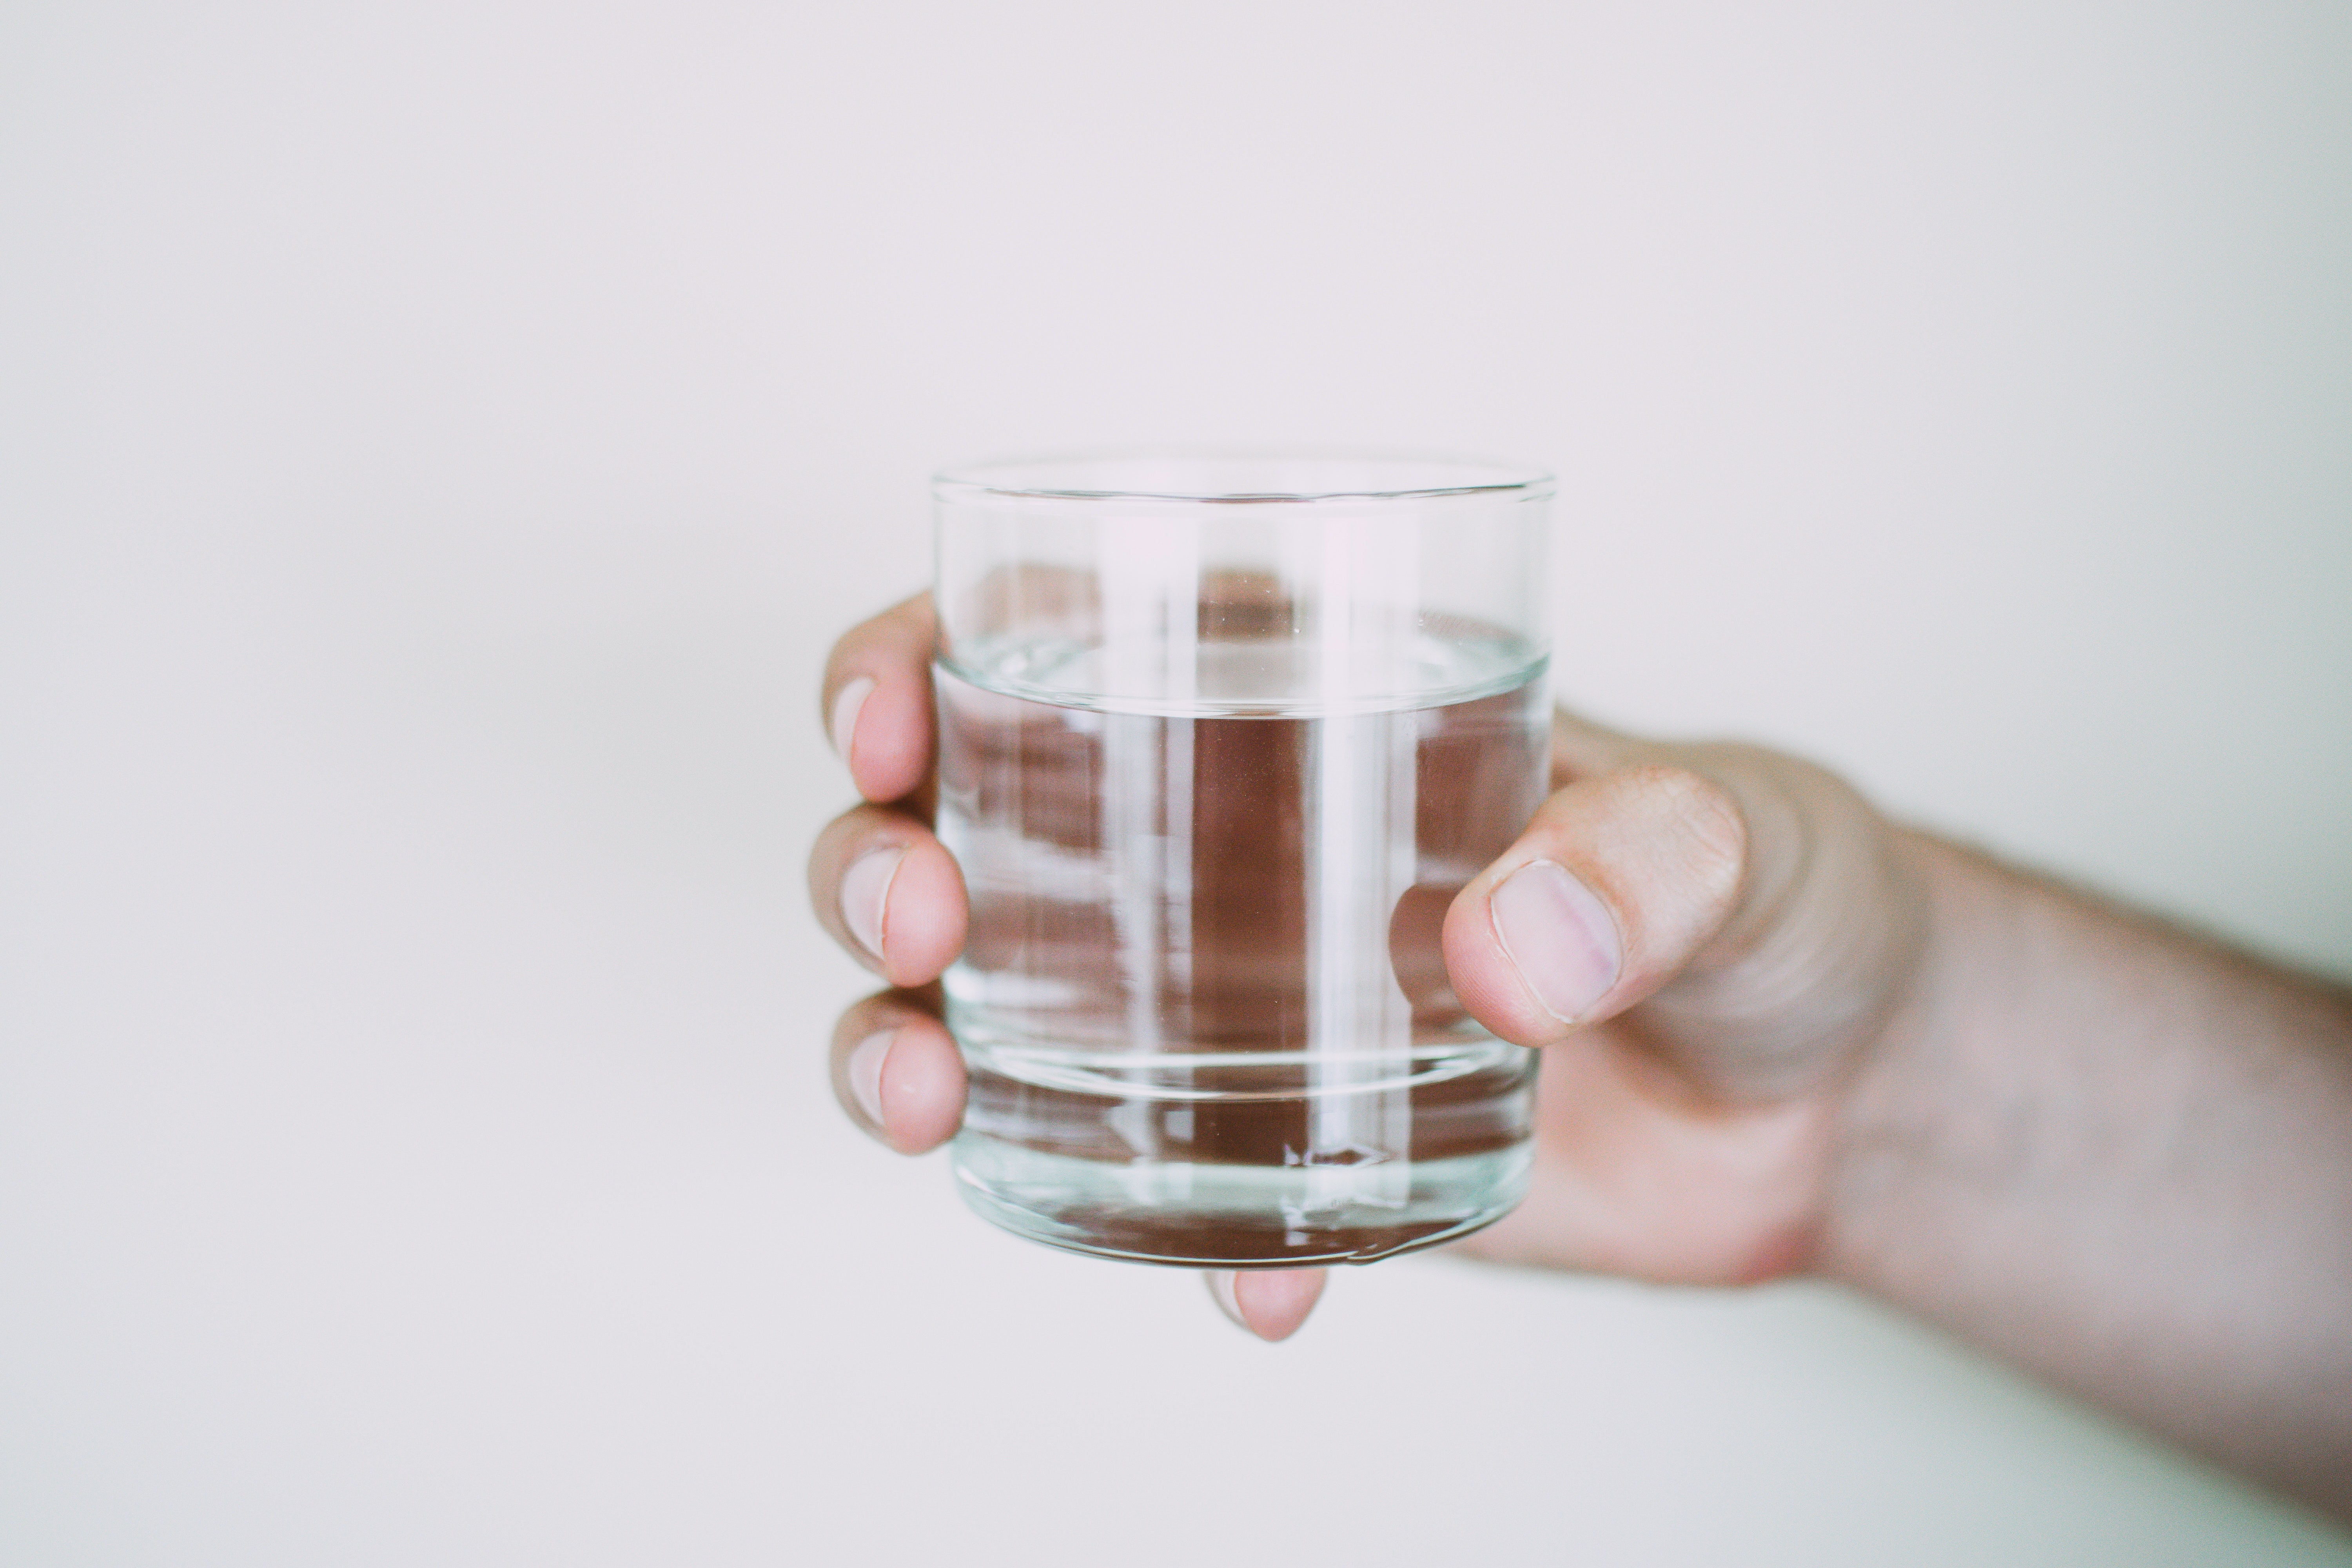 A glass of water. | Source: Pexels